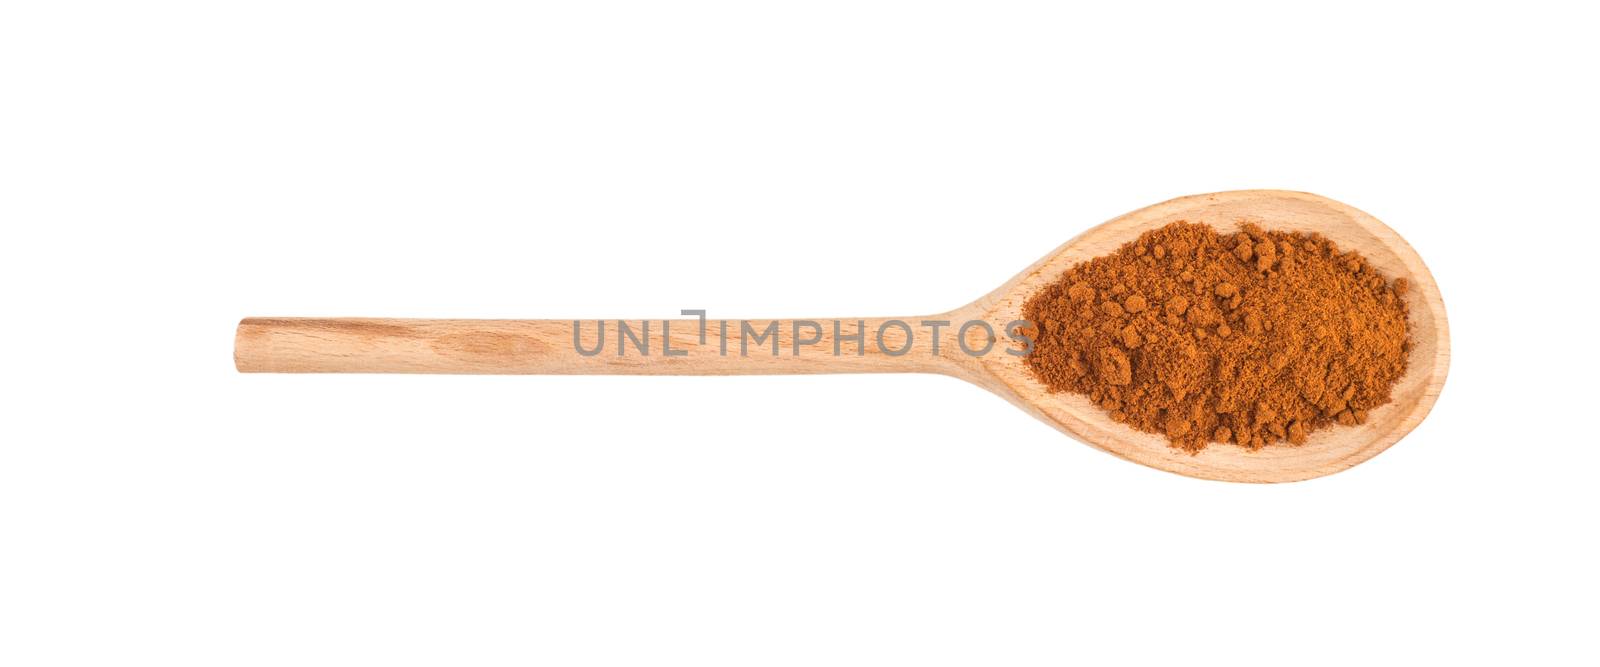 close up of pepper paprika seasoning in wooden spoon on white background with clipping path